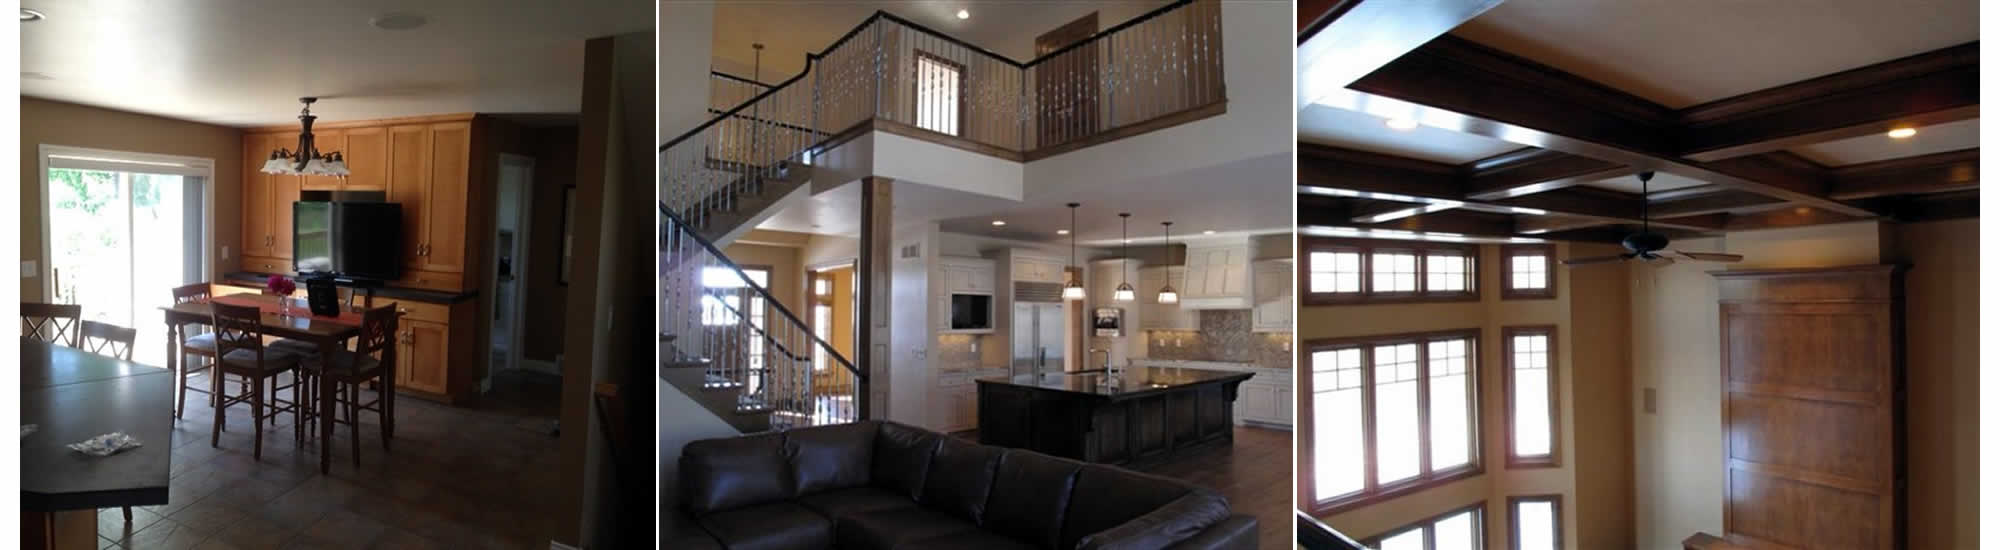 Custom Carpentry, Stair Railing, Cabinetry, Furniture Manitowoc Wisconsin